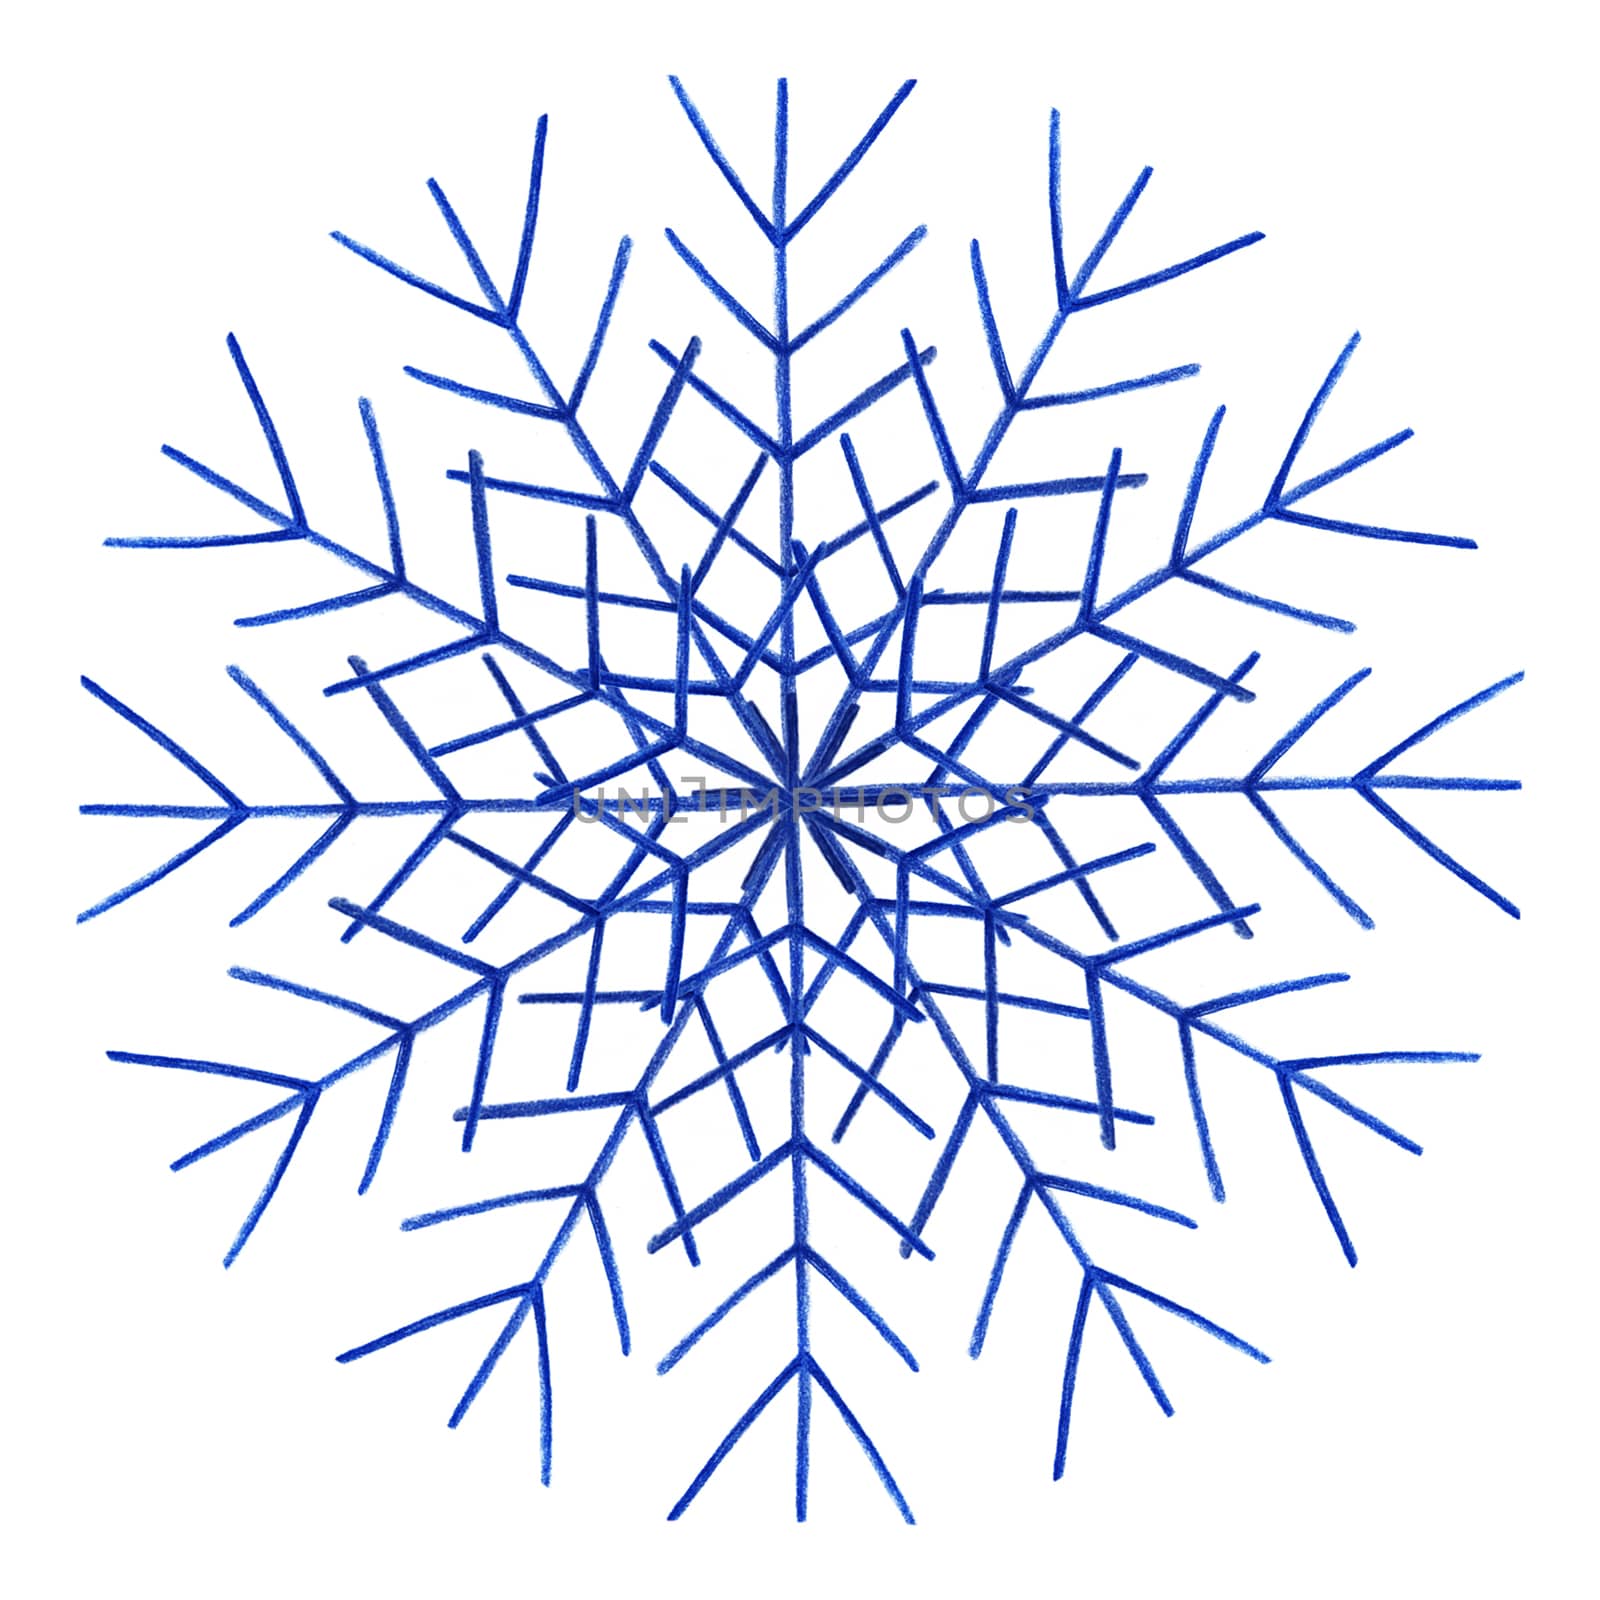 Blue Snowflake Isolated on White Background. Hand Drawn by Color Pencil. Winter Snow Symbol. Design elements for Christmas, New Year, card and other.